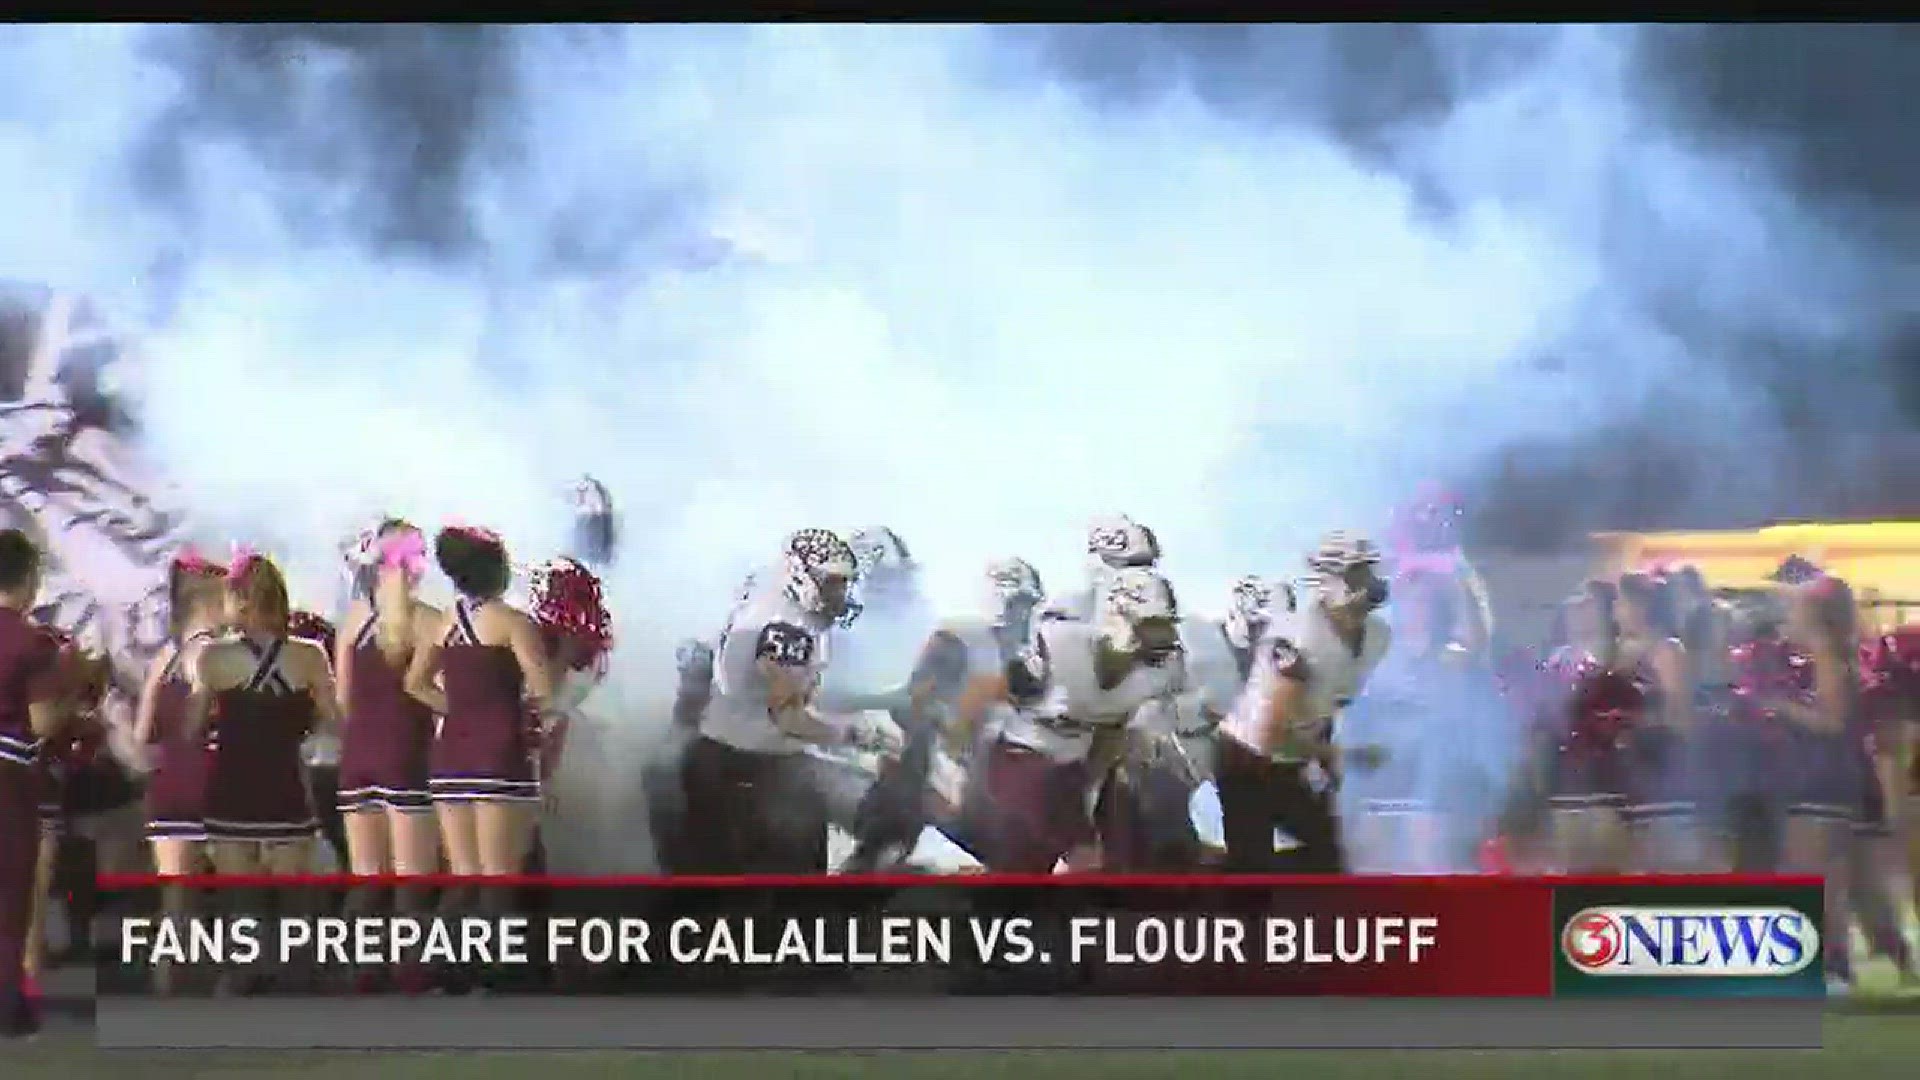 The 30-5A District Championship football game between Calallen and Flour Bluff high schools kicked off at 7 p.m. Thursday at Calallen High School's Wildcat Stadium.